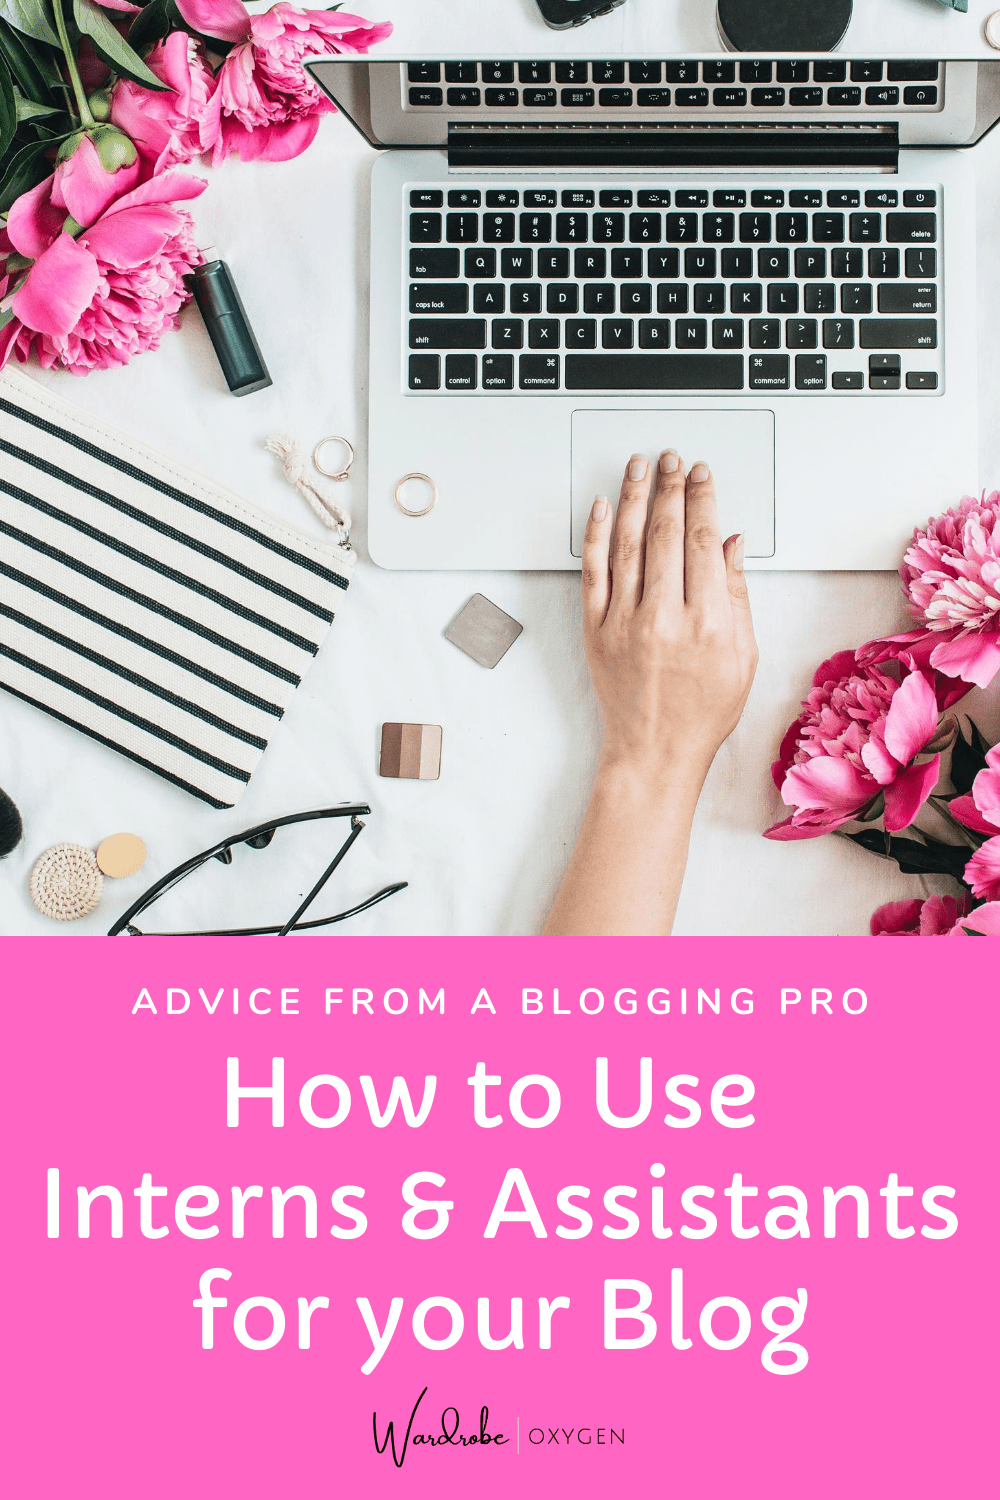 Why Blogs Have Assistants and Interns